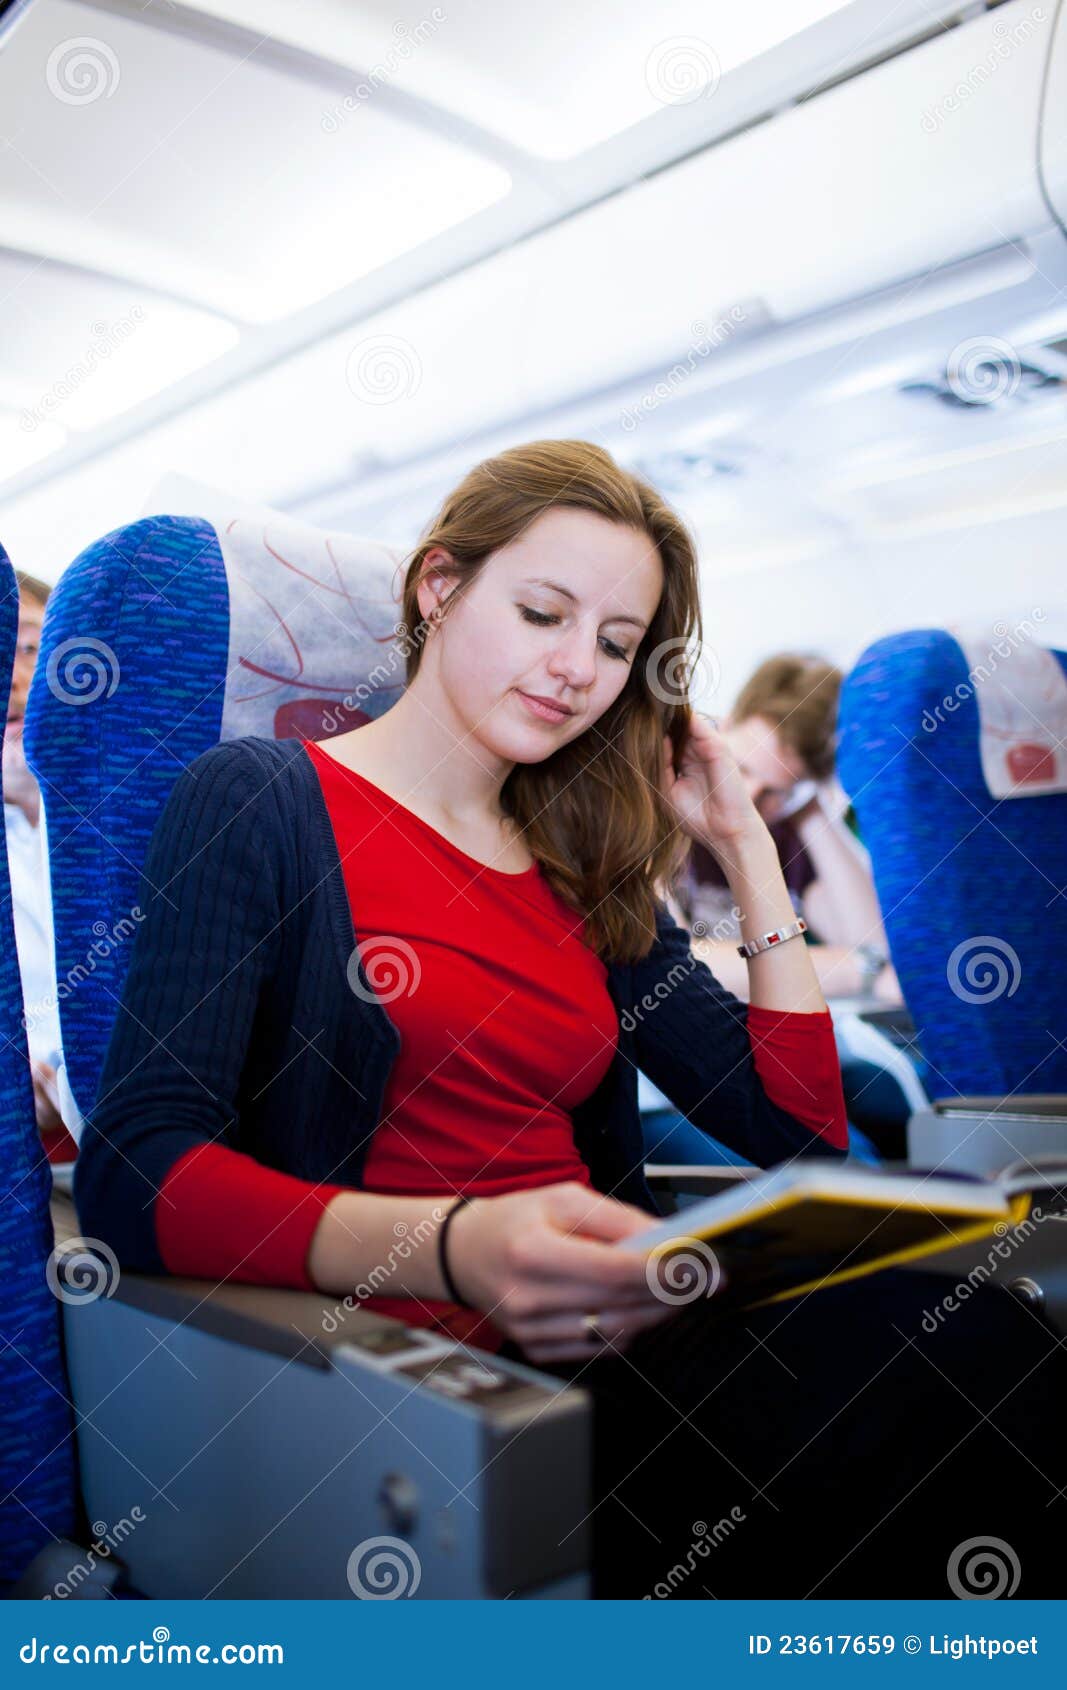 Female Passenger On Board Of An Aircraft Stock Image